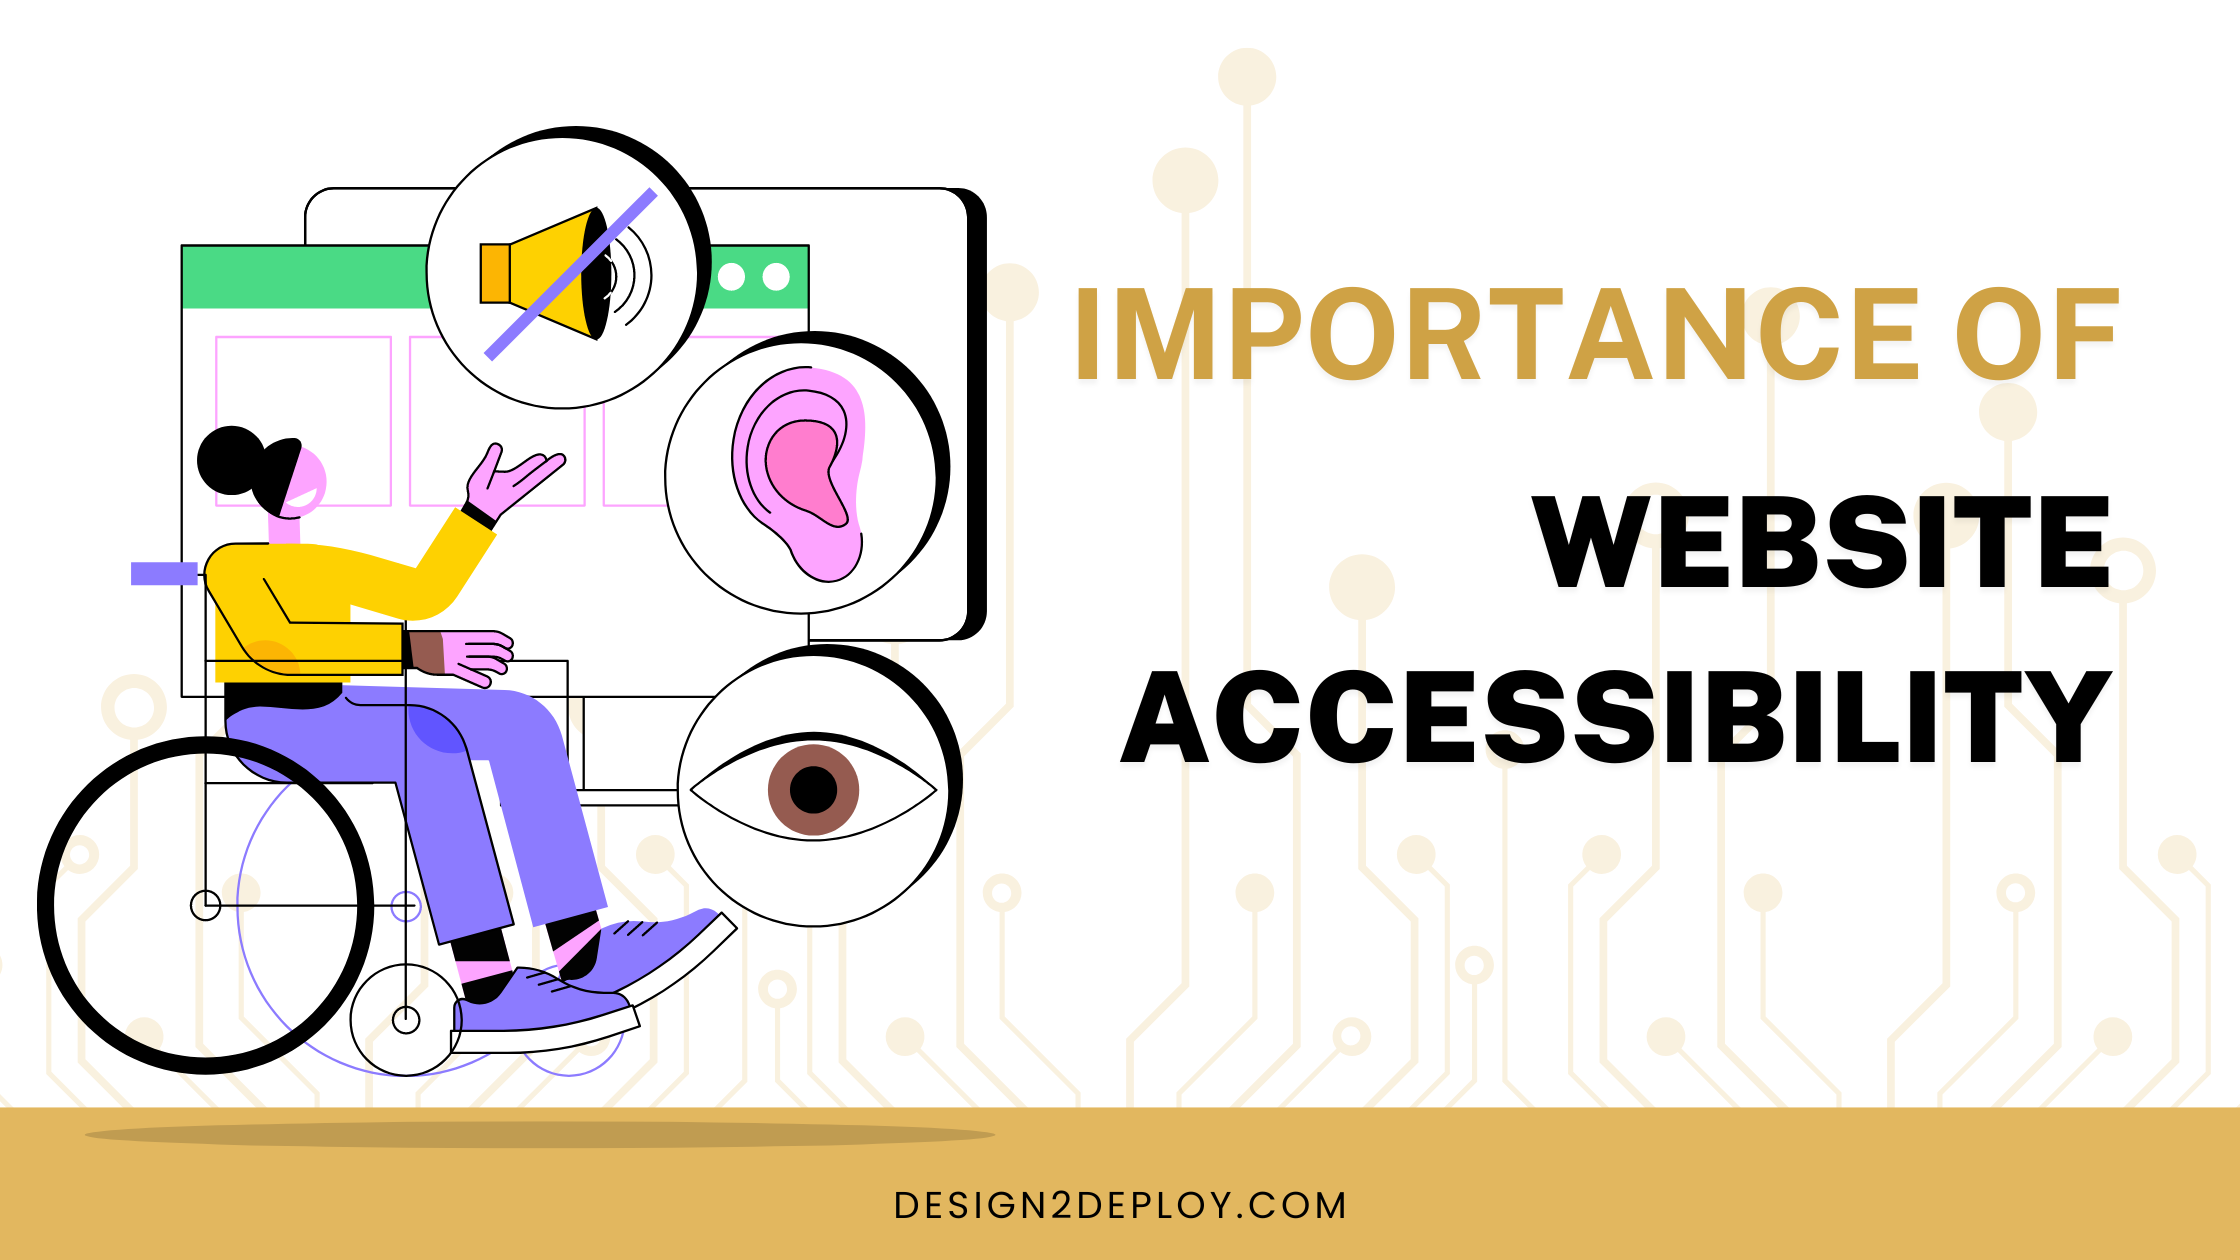 The Importance of Website Accessibility for Business Growth